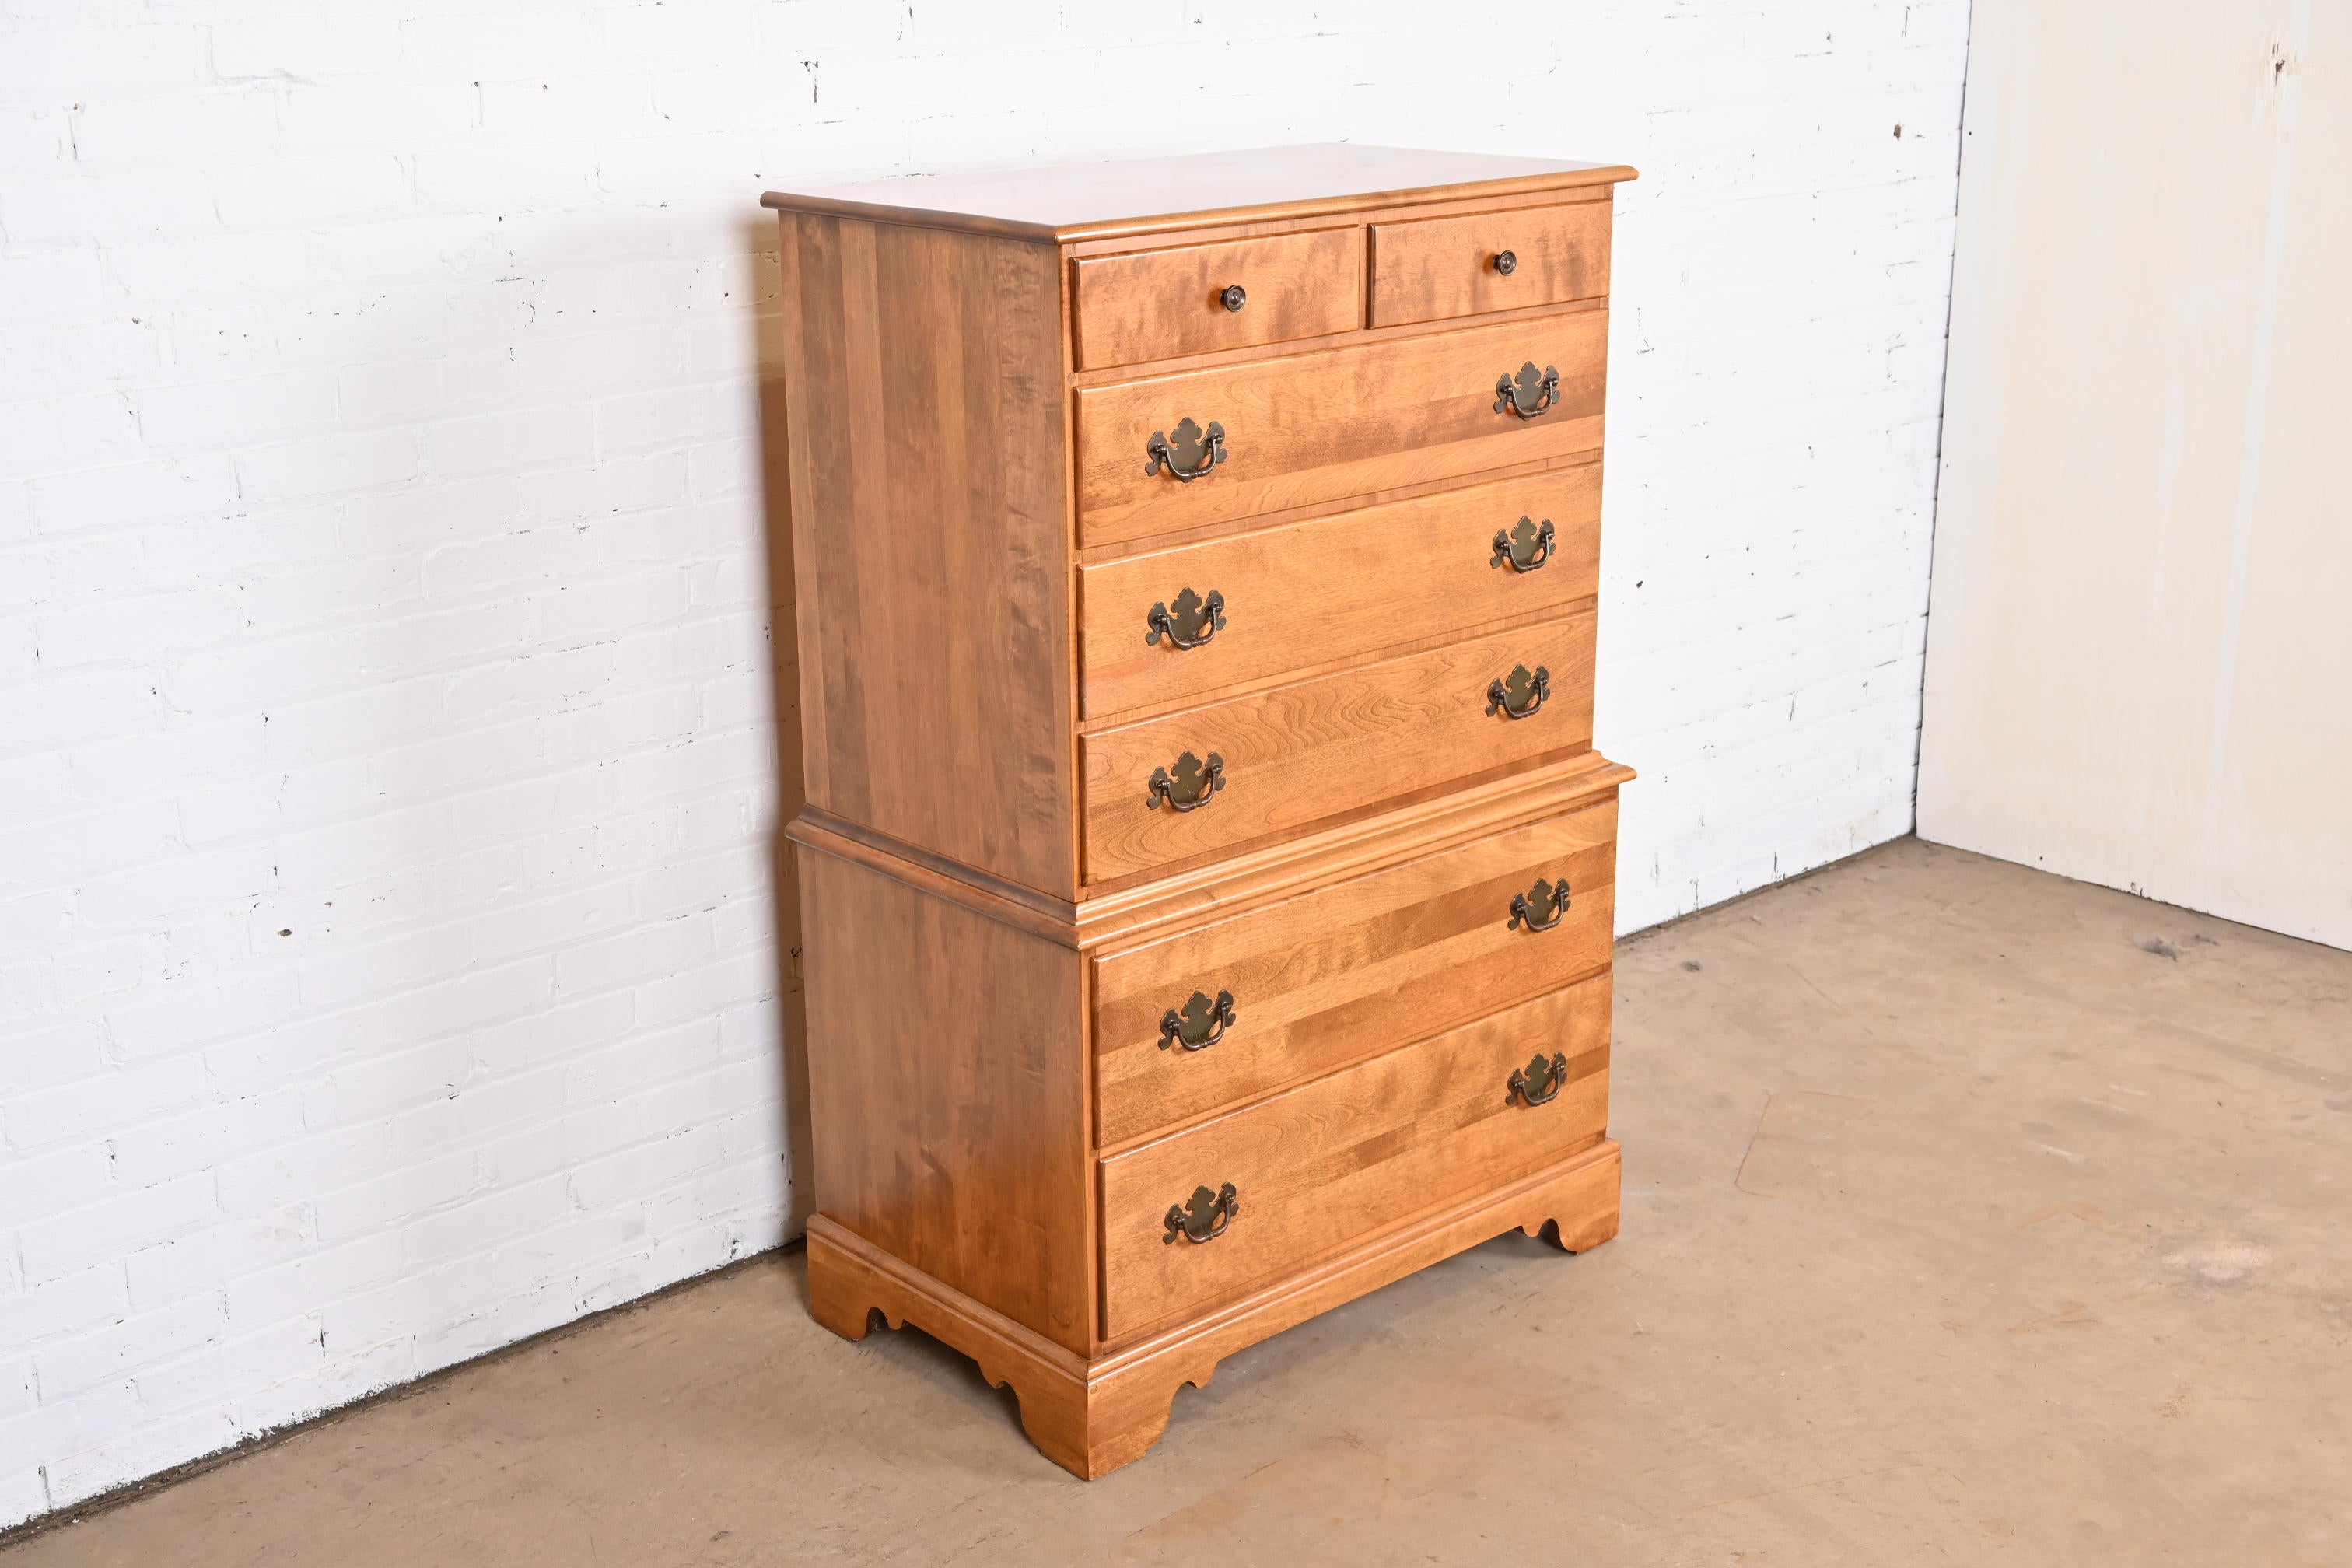 A gorgeous American Colonial style seven-drawer highboy dresser or chest of drawers

By Ethan Allen

USA, Circa 1970s

Solid maple, with original brass hardware.

Measures: 34.5